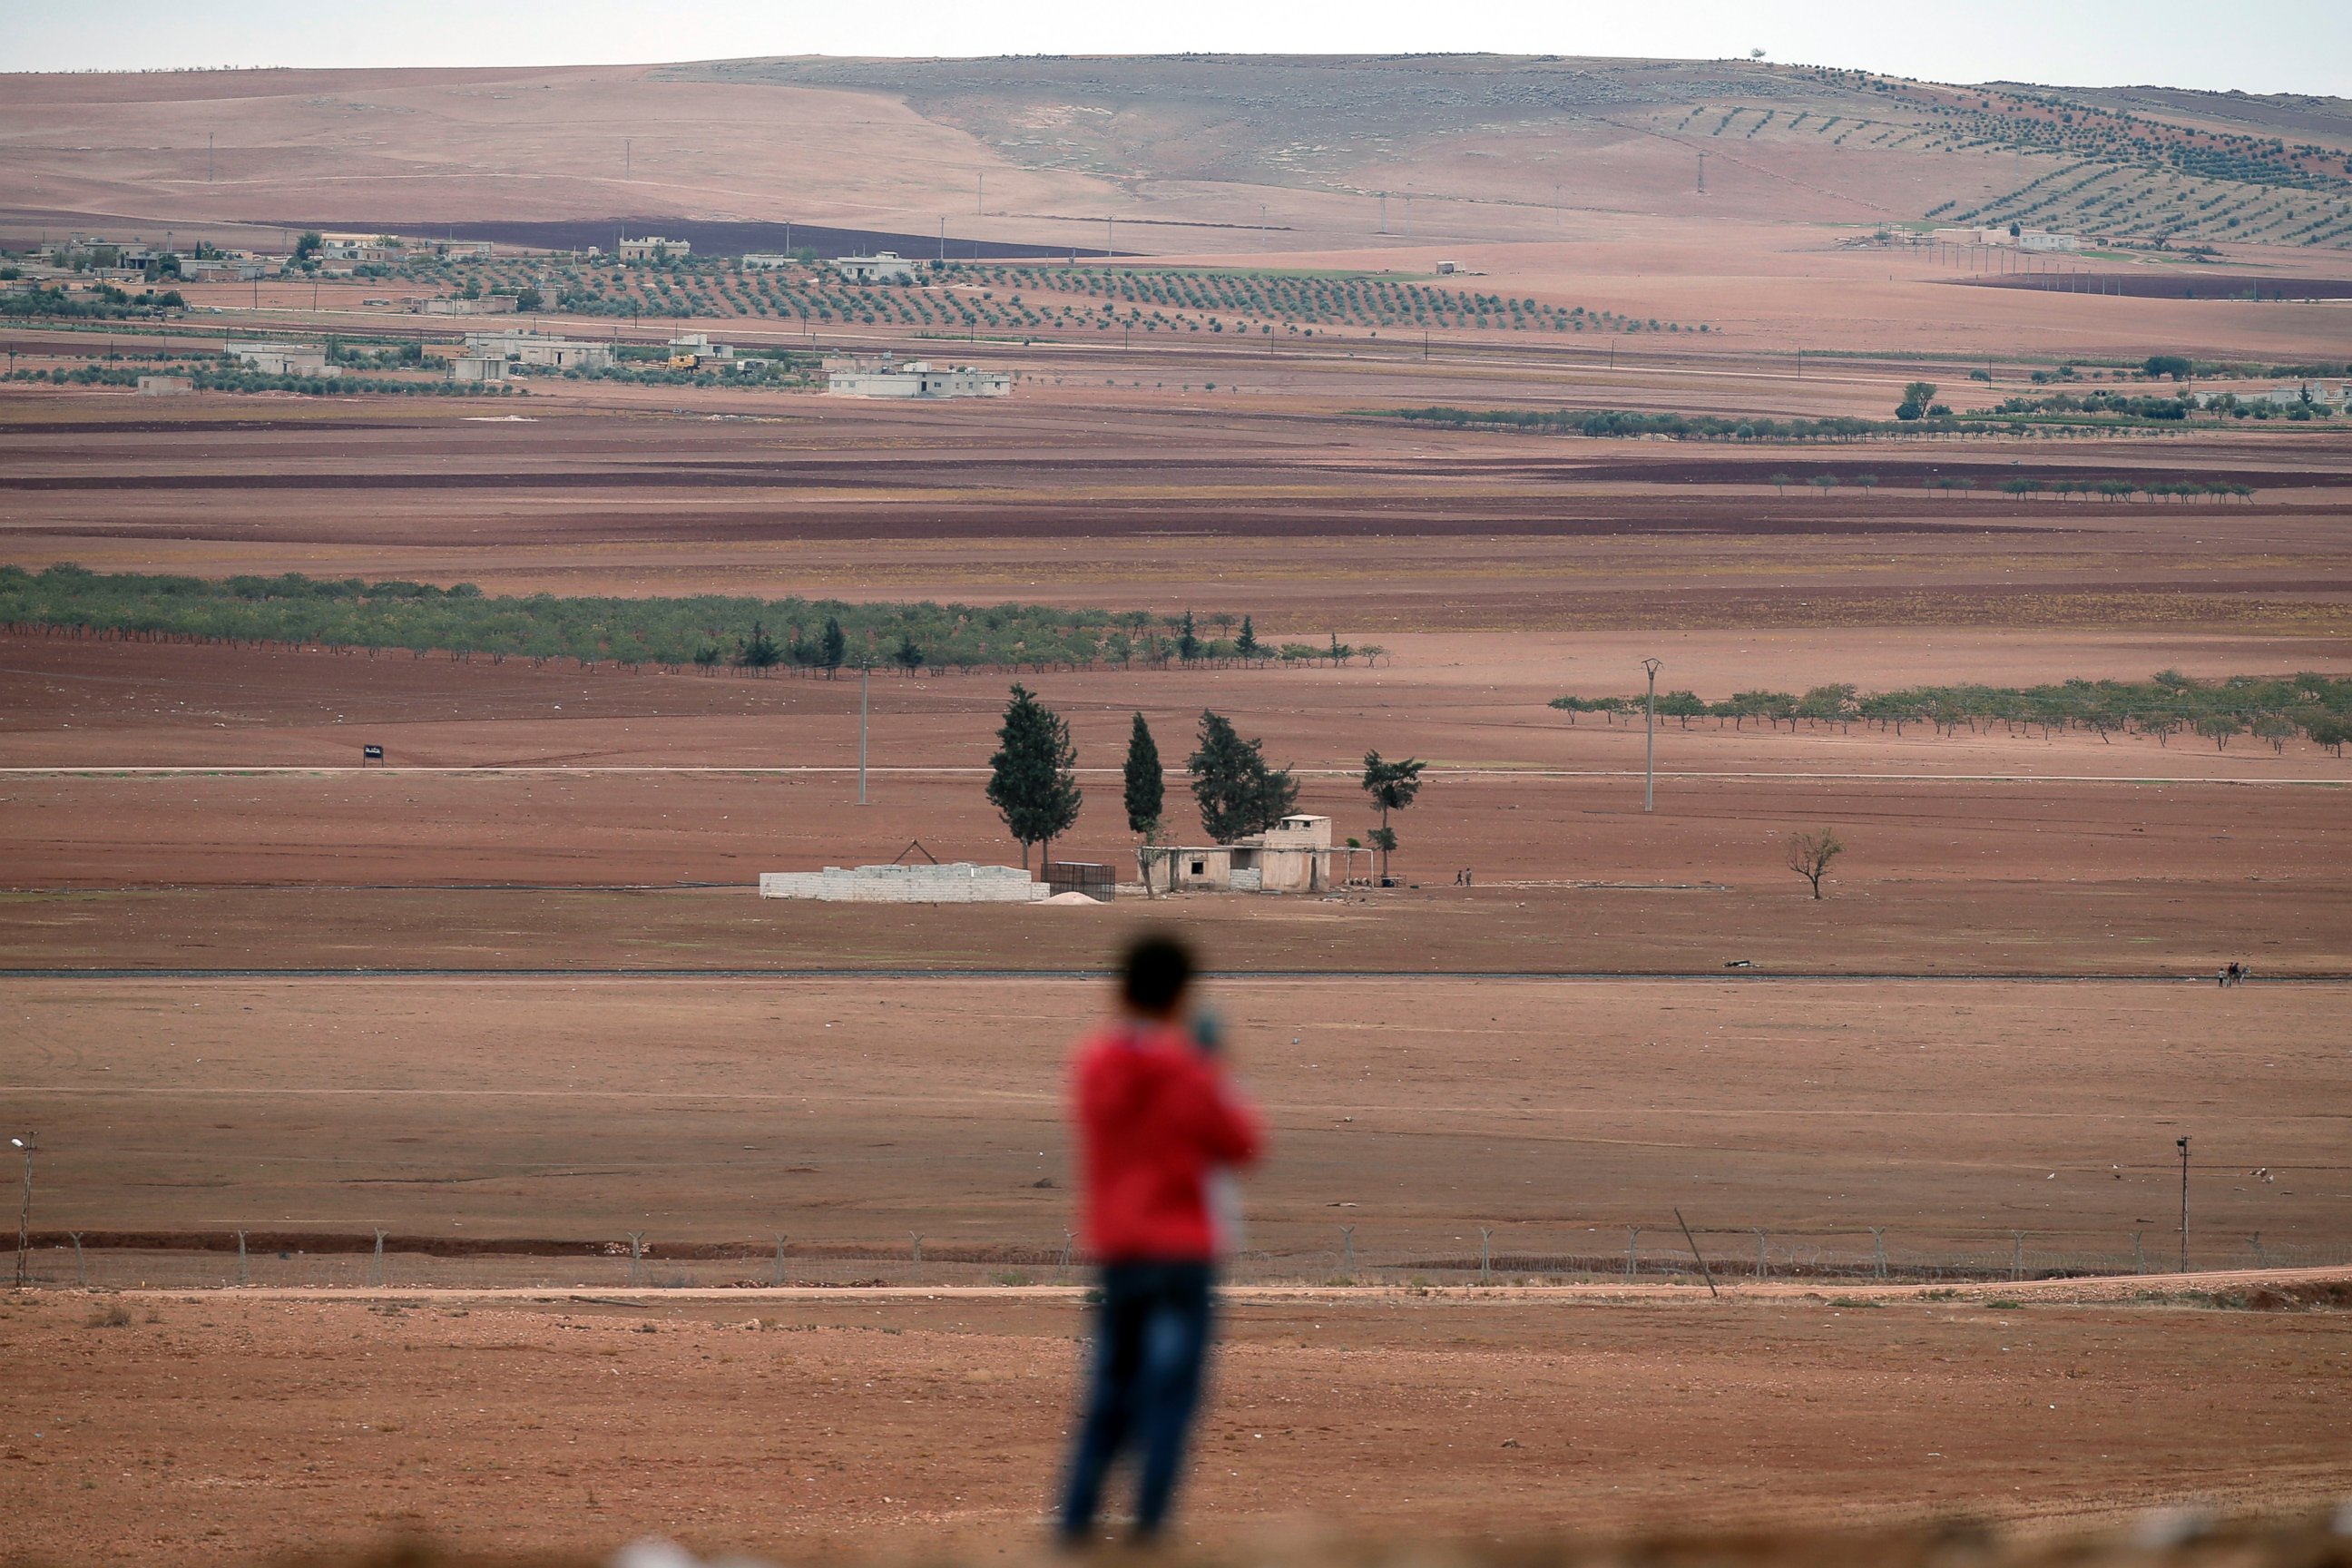 A boy uses a mobile phone to photograph the western outskirts of Kobani, Syria on the distance, as he stands on a hilltop on the outskirts of Suruc, at the Turkey-Syria border, Oct. 19, 2014.